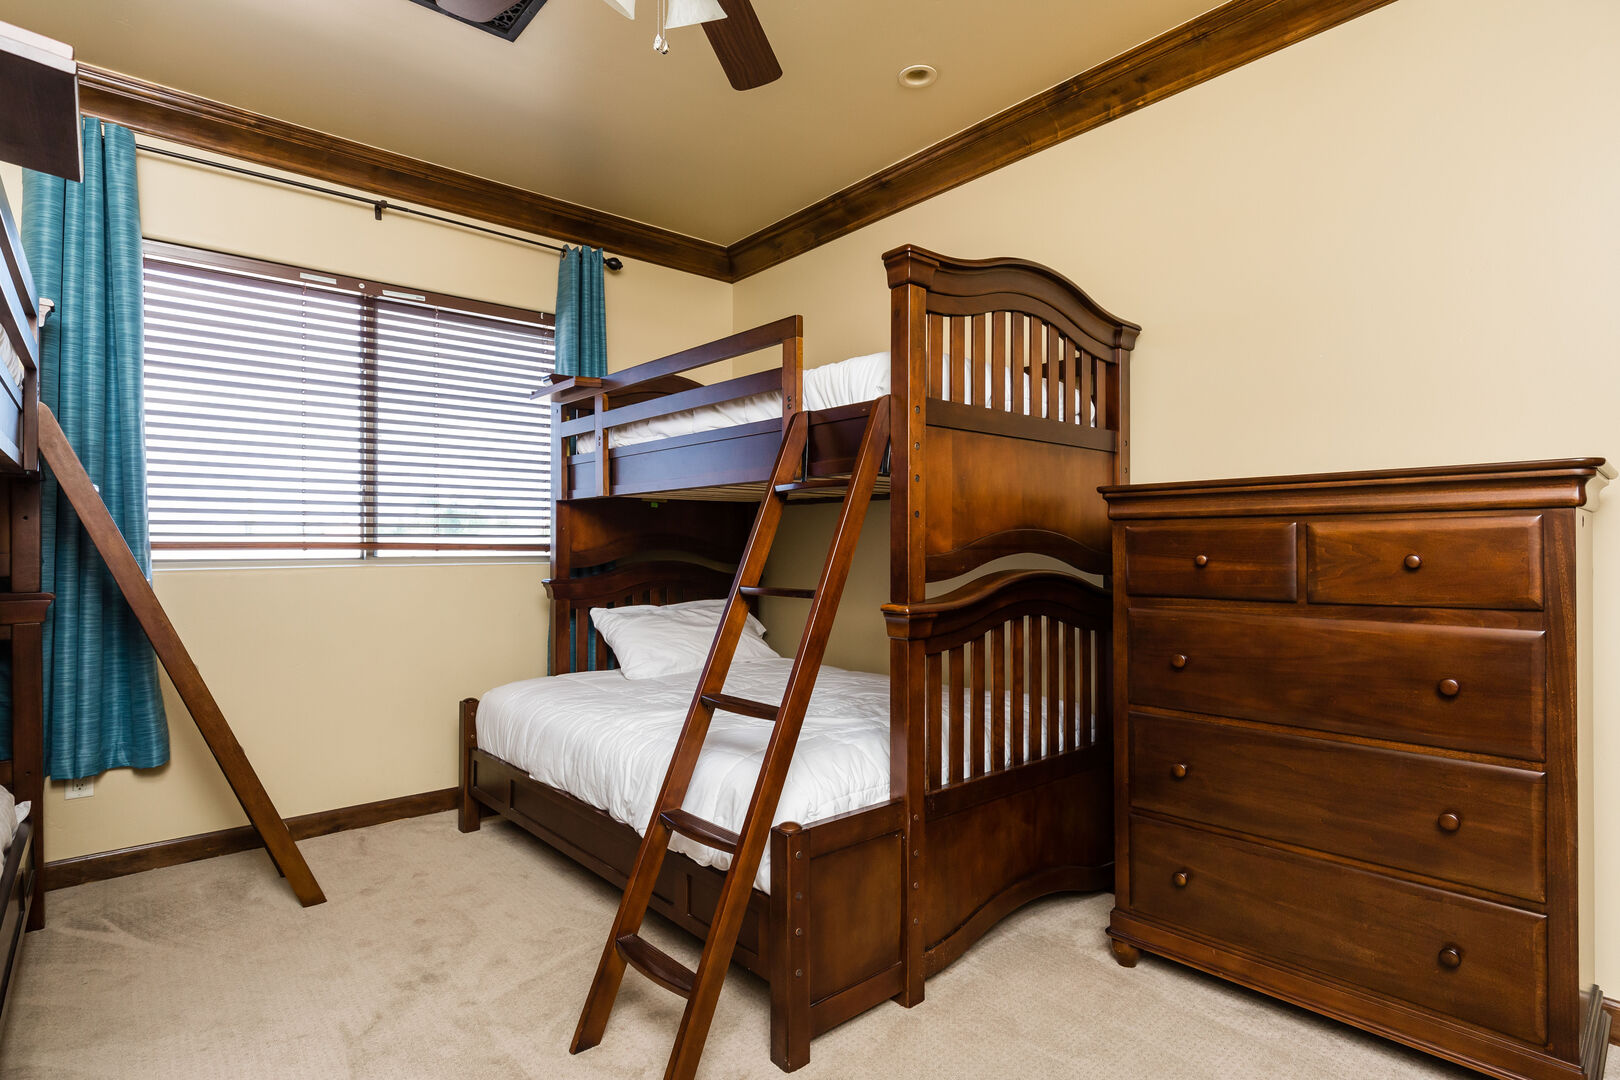 4th Bedroom featuring 2 Bunk Beds offering 3 Twin Beds and a Queen Bed with bedroom furnishings and an ensuite bathroom.